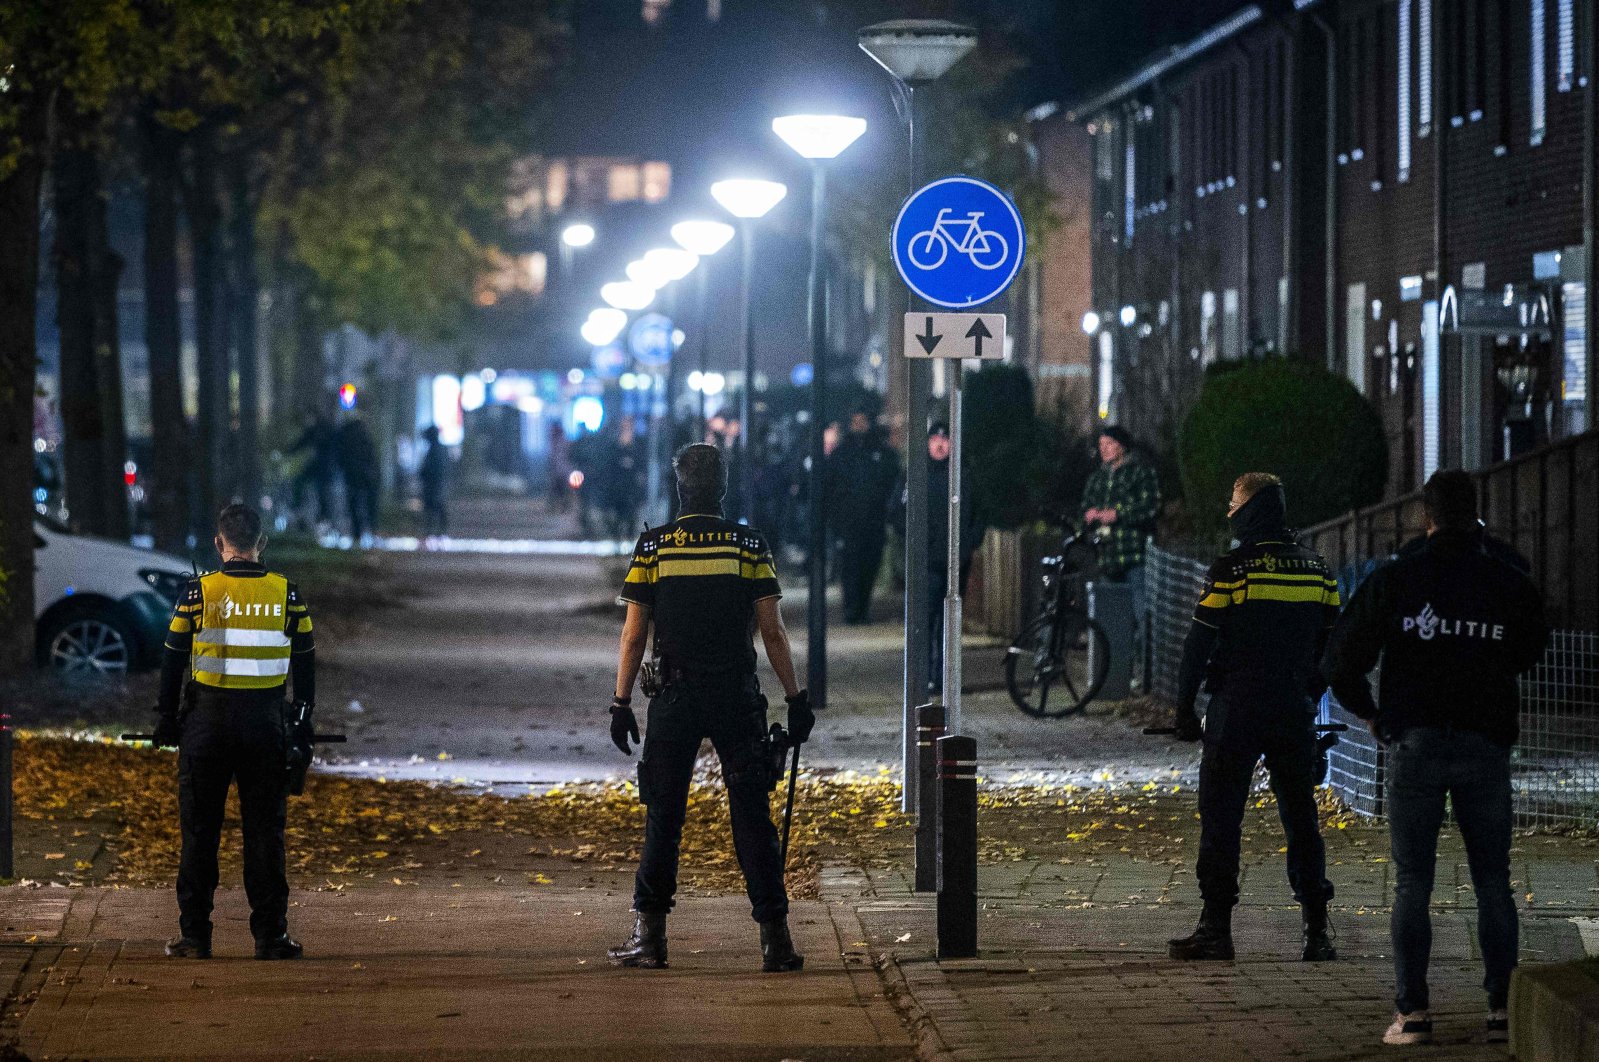 Police officers patrol on the street during riots against the partial lockdown and the 2G government policy at the De Kemp district in Roermond, the Netherlands, on Nov. 20, 2021. (Photo by ROB ENGELAAR / ANP / AFP)